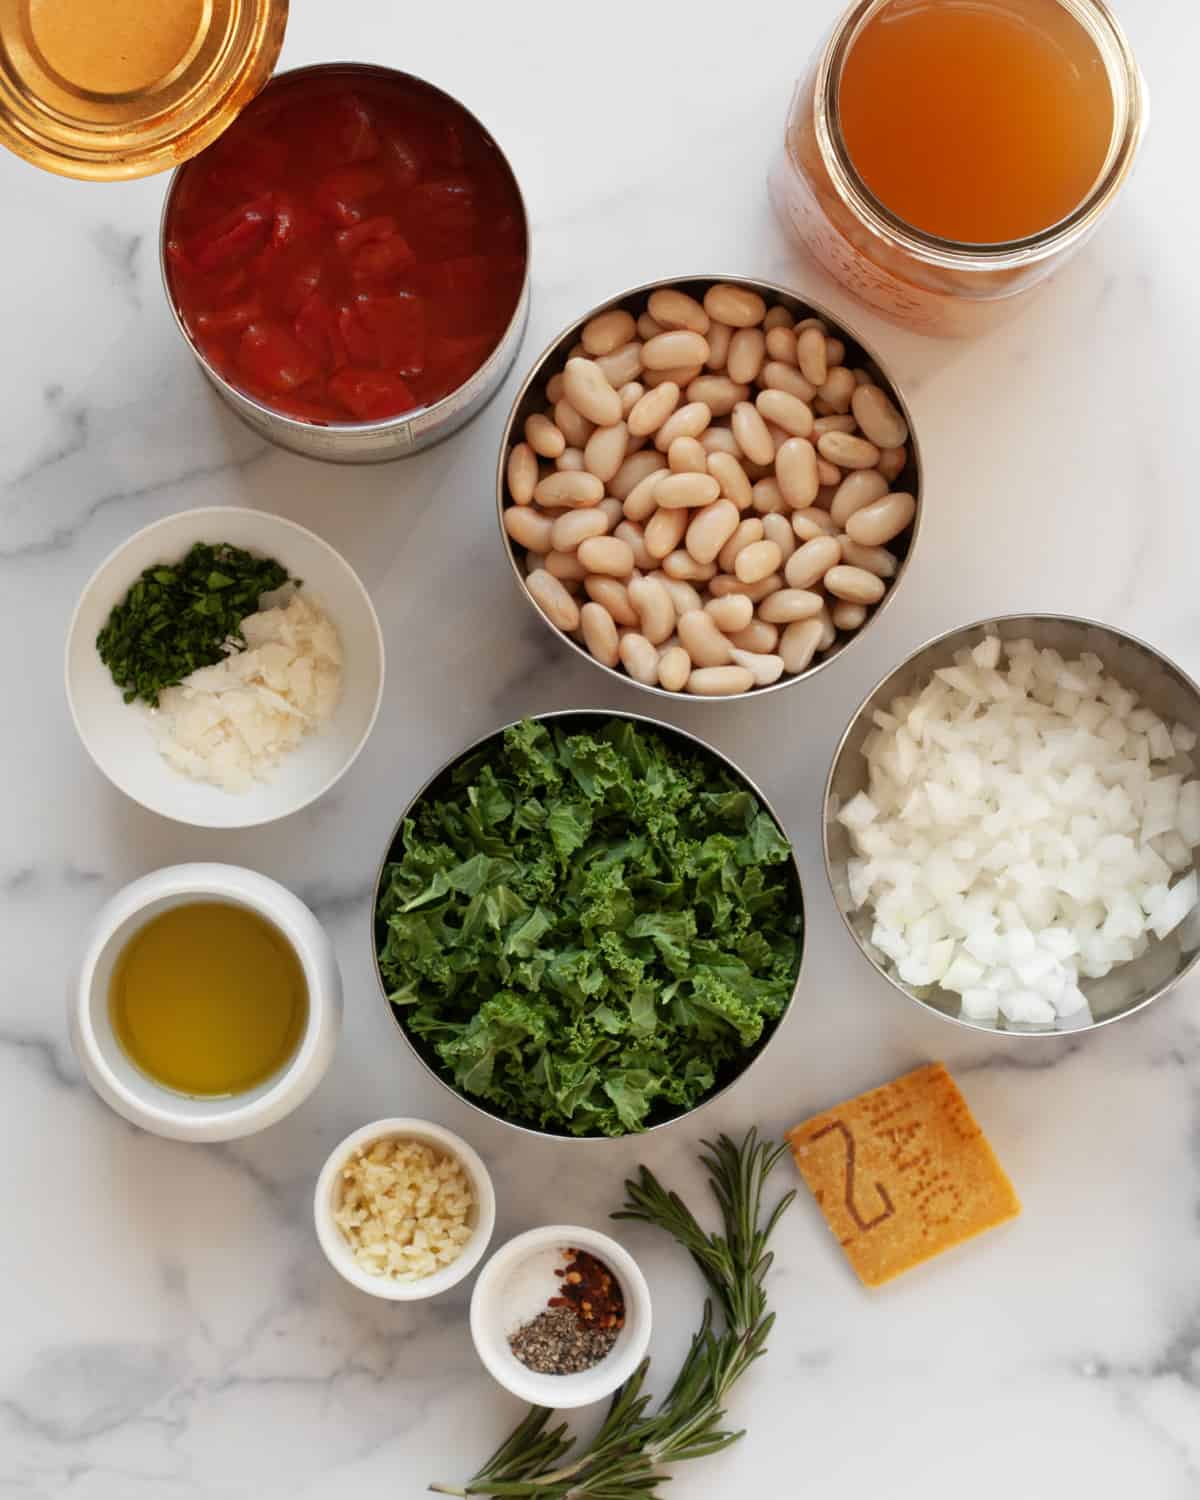 Ingredients including tomatoes, rosemary sprigs, white beans, kale, veggie broth, garlic, parmesan rind, salt and pepper.